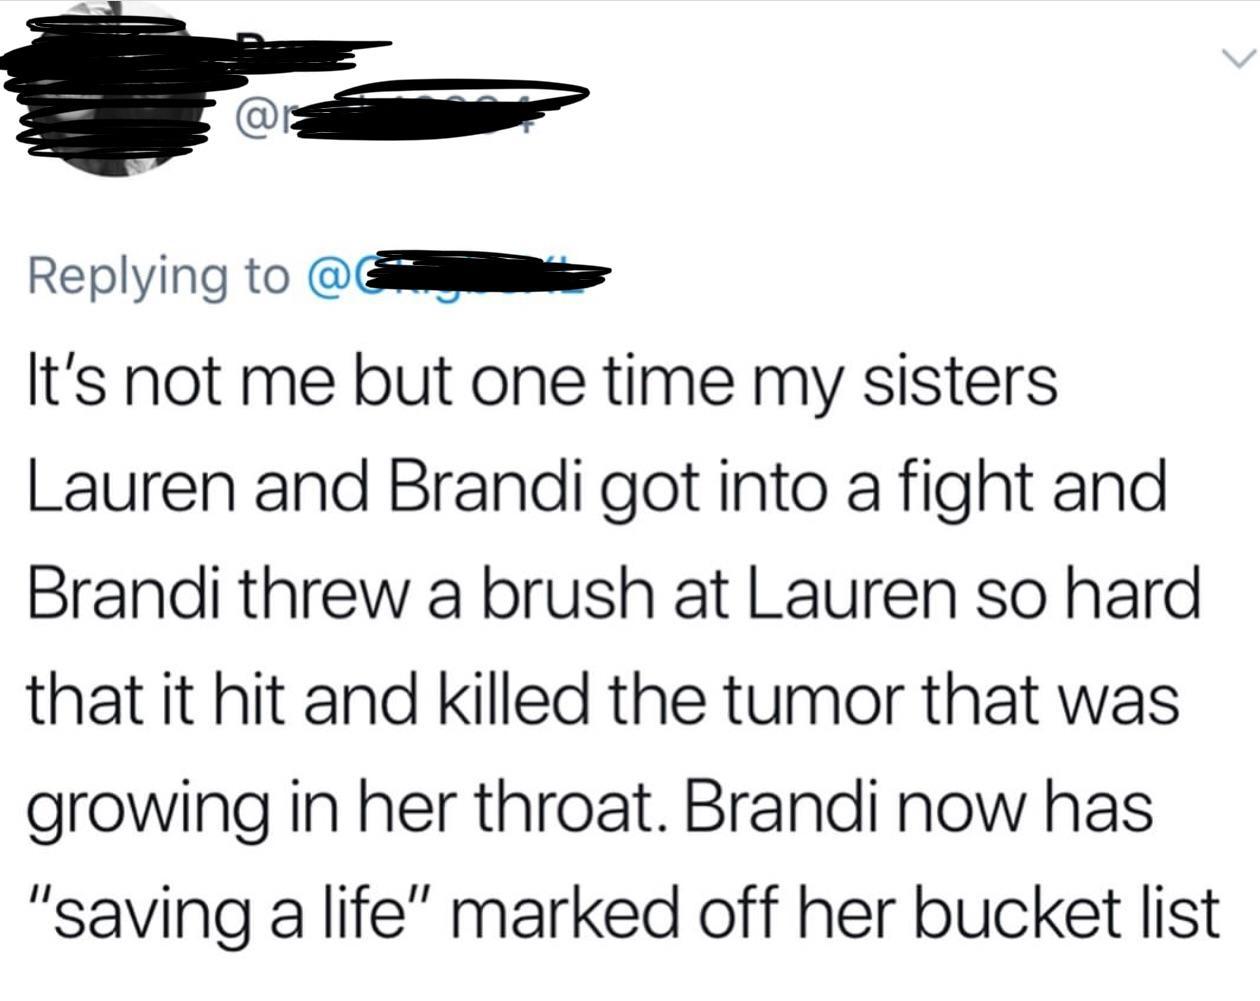 angle - @ It's not me but one time my sisters Lauren and Brandi got into a fight and Brandi threw a brush at Lauren so hard that it hit and killed the tumor that was growing in her throat. Brandi now has "saving a life" marked off her bucket list